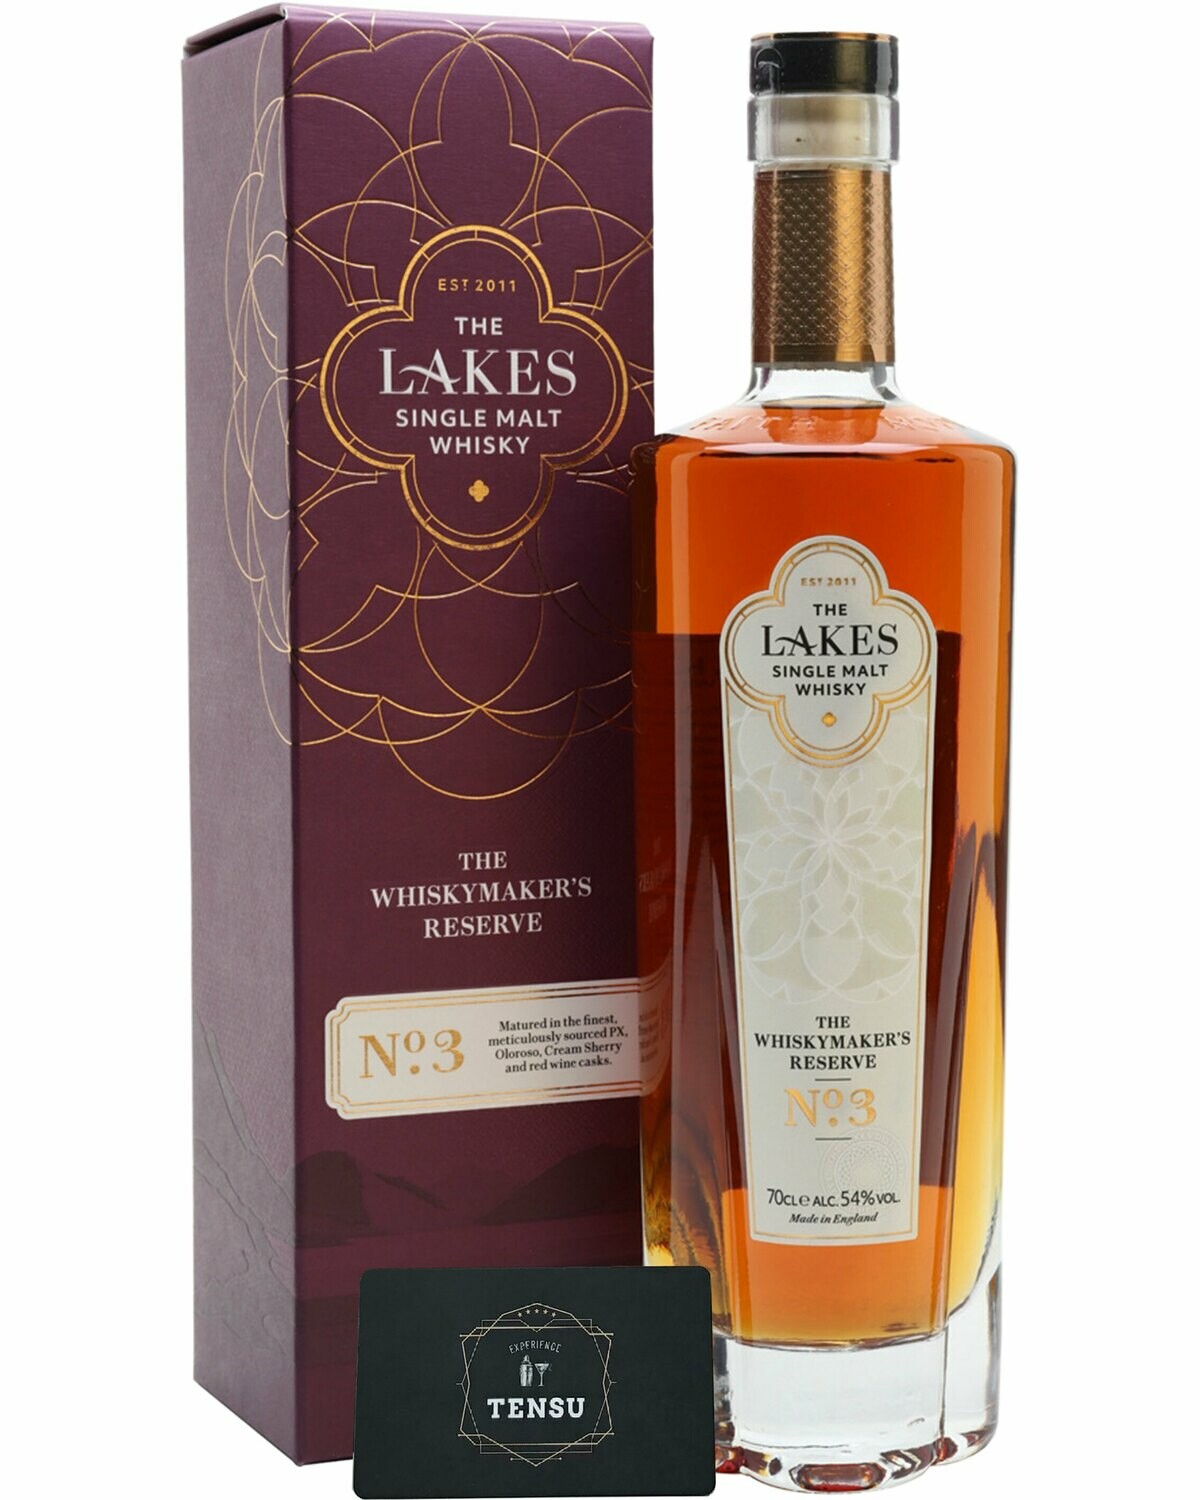 The Lakes - The Whiskymaker's Reserve No.3 54.0 "The Lakes Distillery"